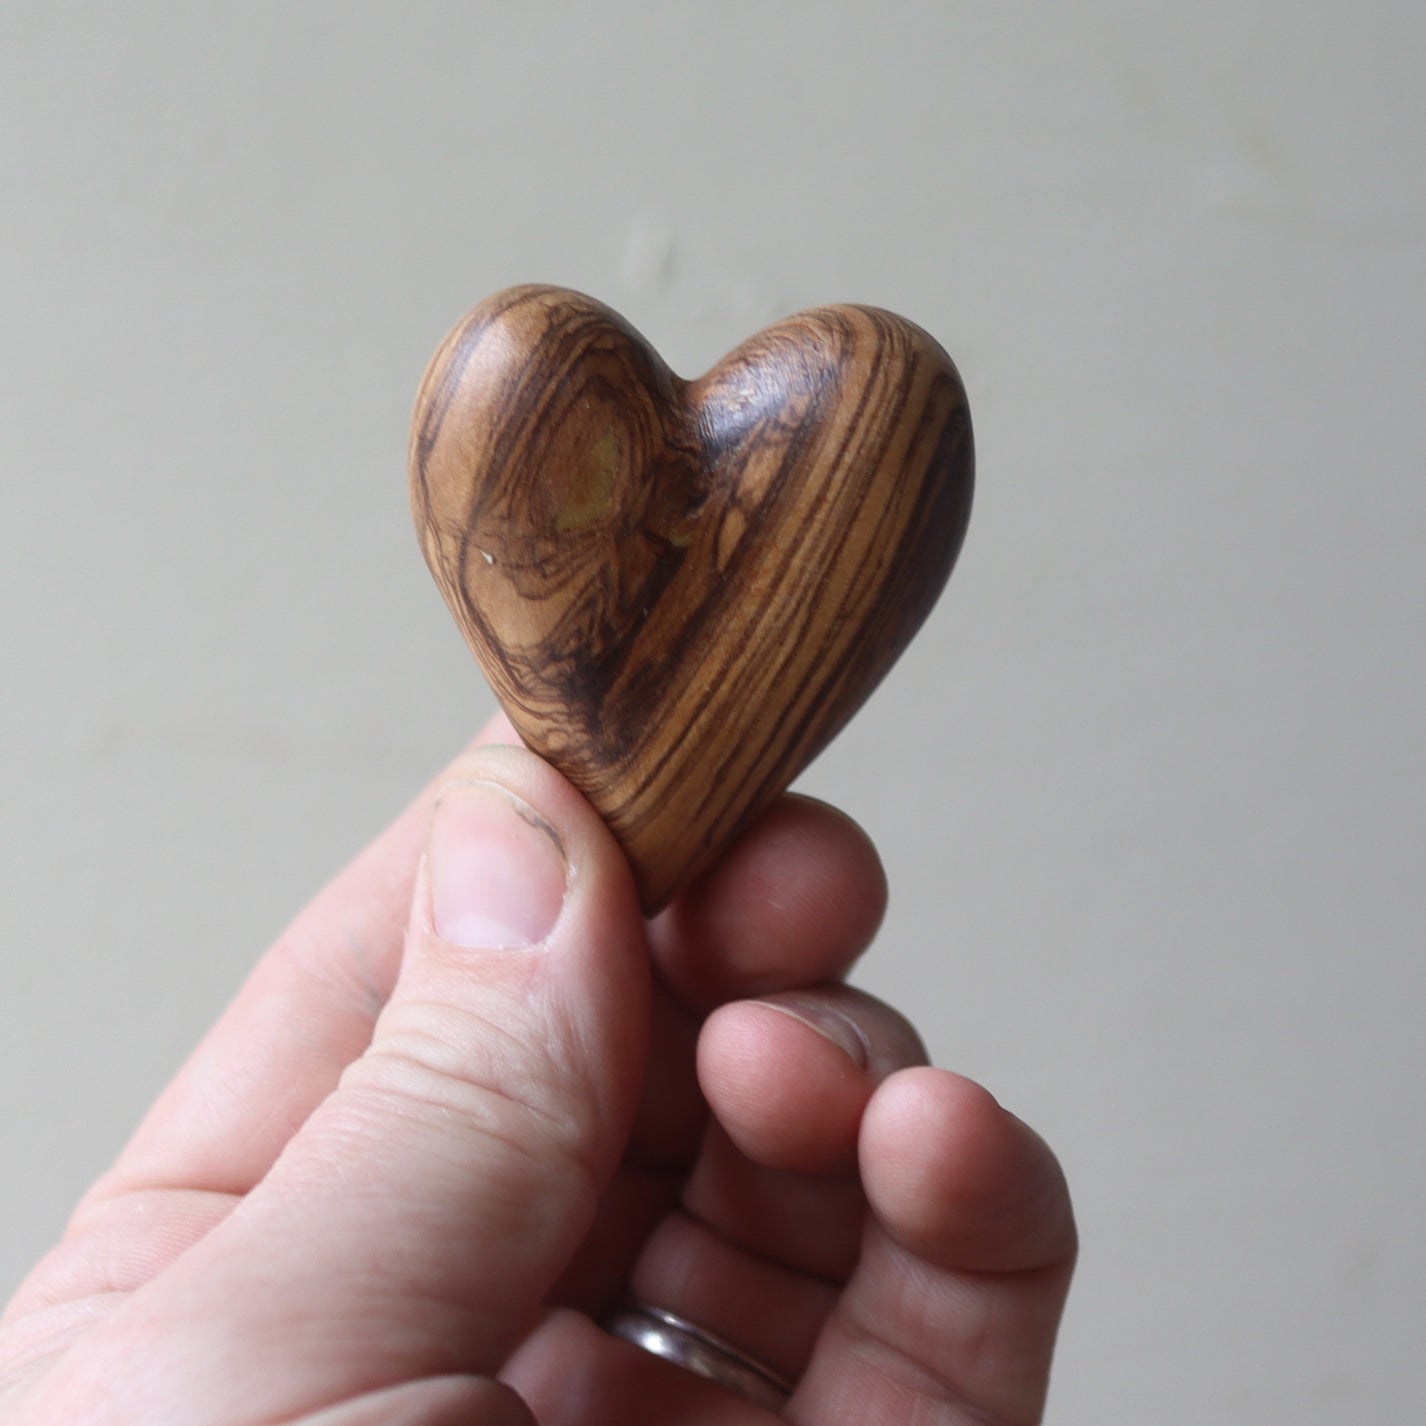 Palestinian Olive Wood Hearts Entwined – Humble Hilo